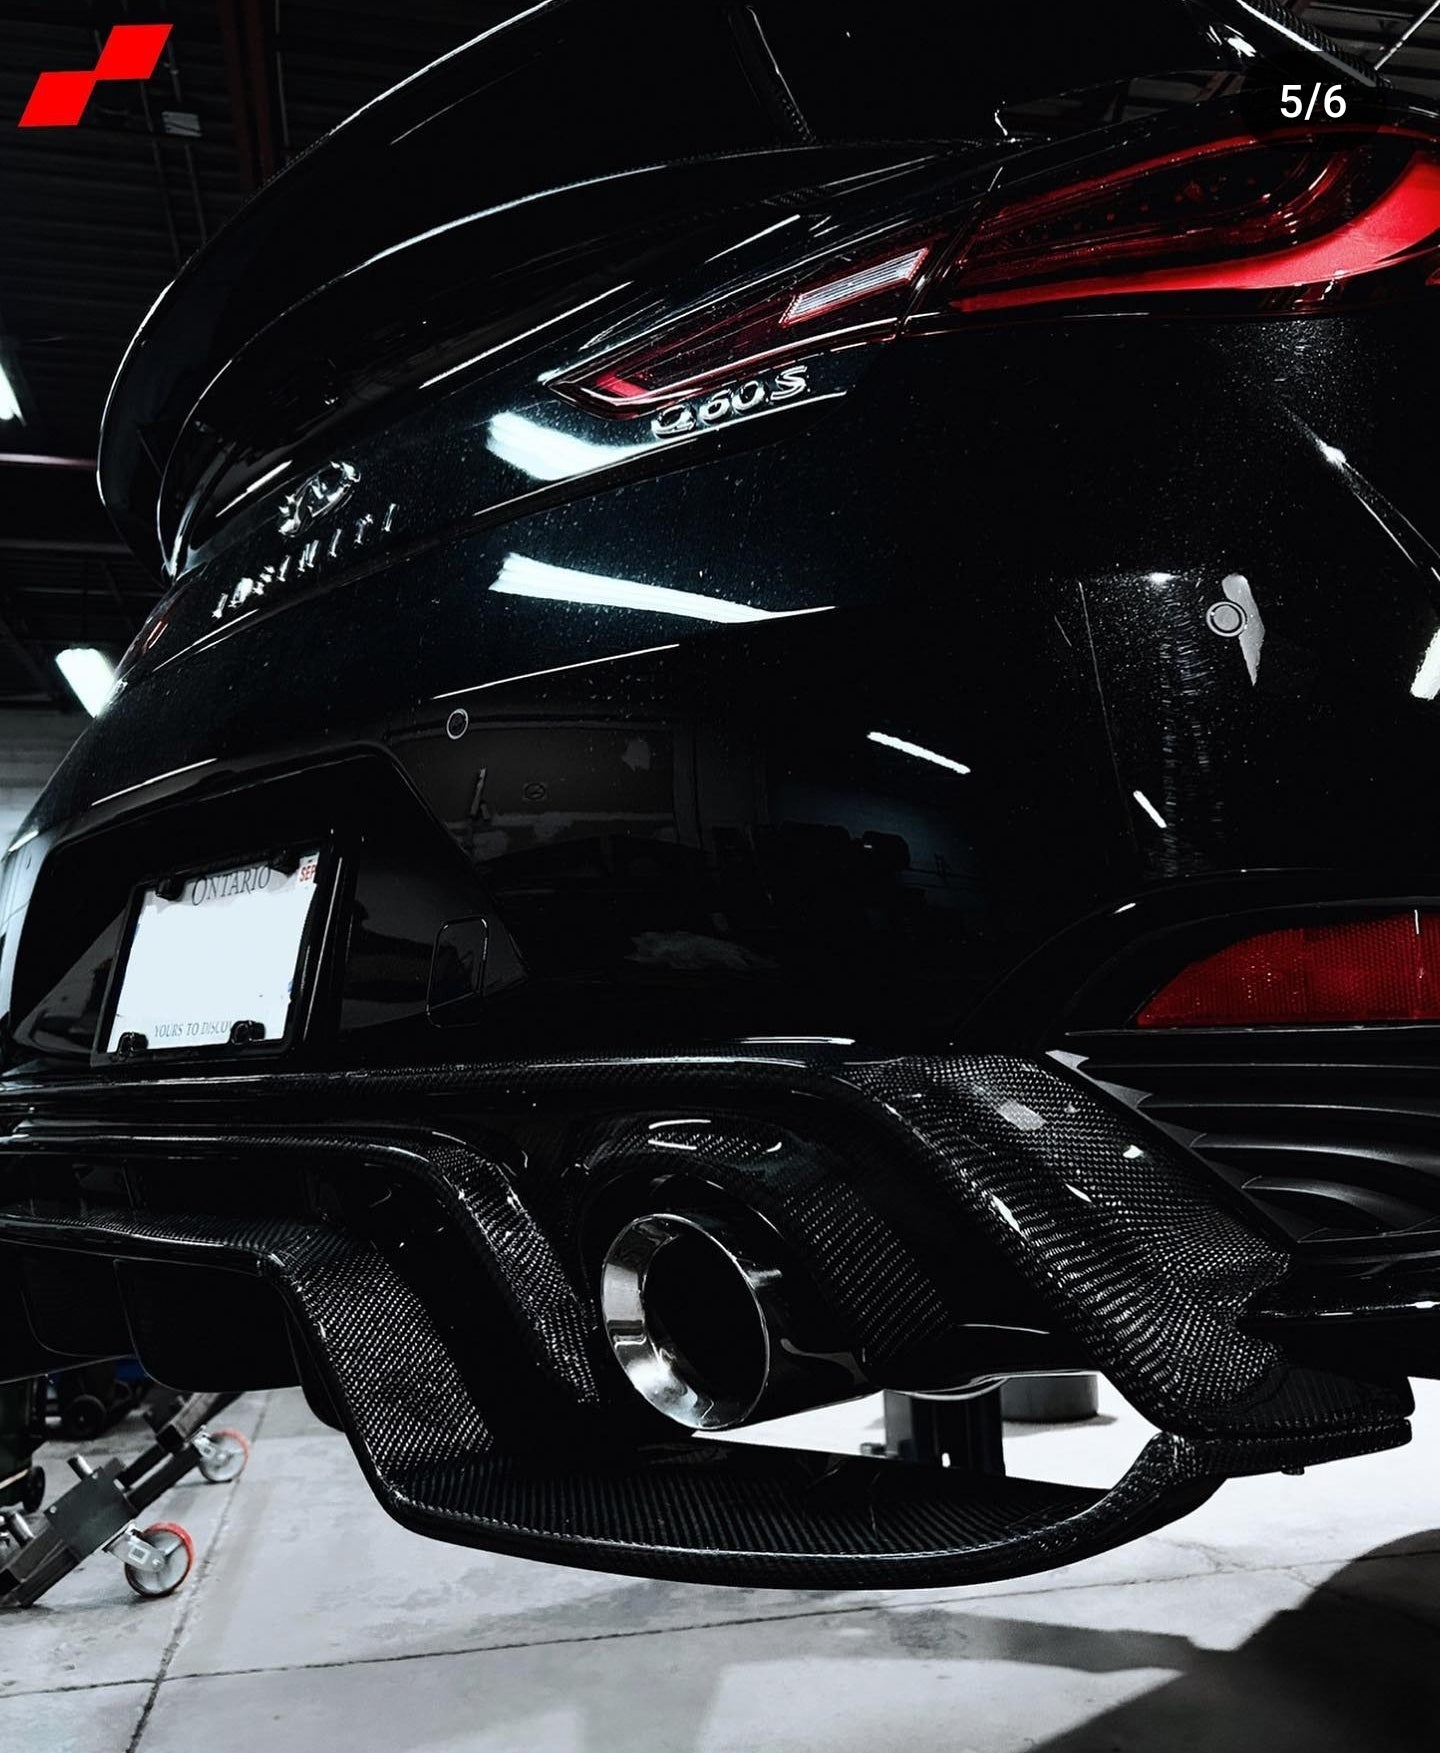 Close-up view of the JCF 2 Piece Carbon Fiber Diffuser for the Infiniti Q60, showing detailed carbon weave.